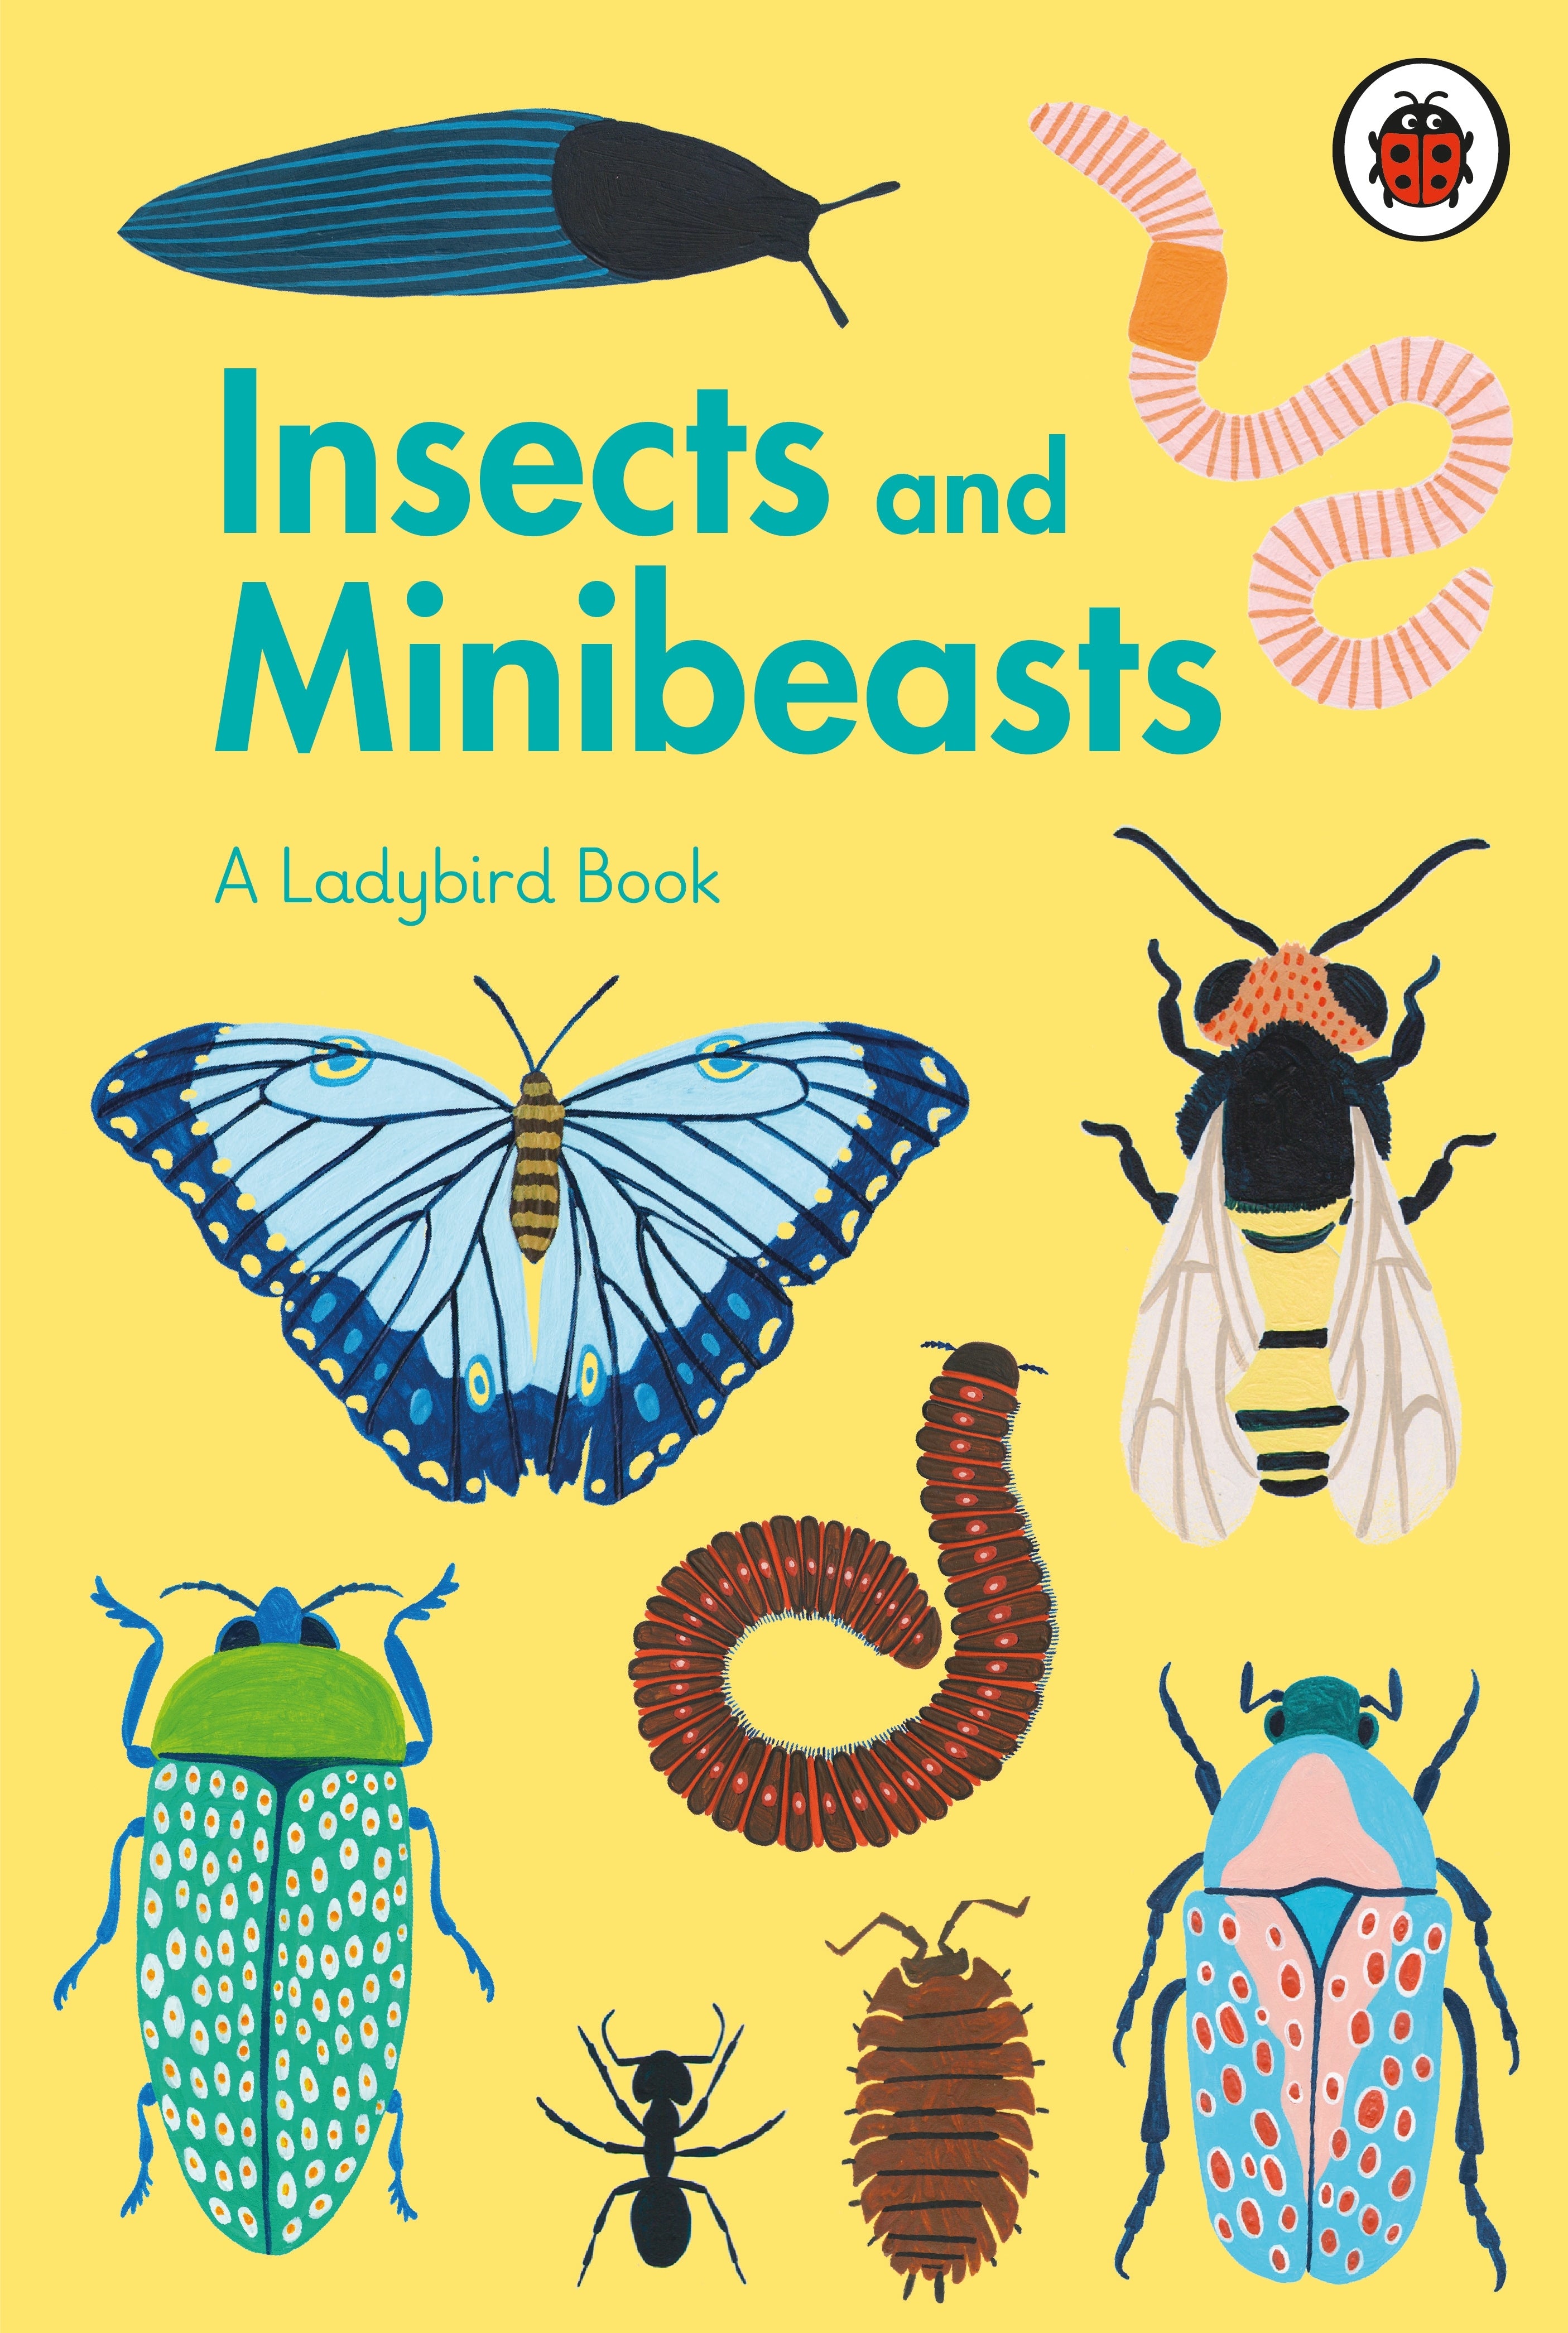 Insects and Minibeasts: A Ladybird Book